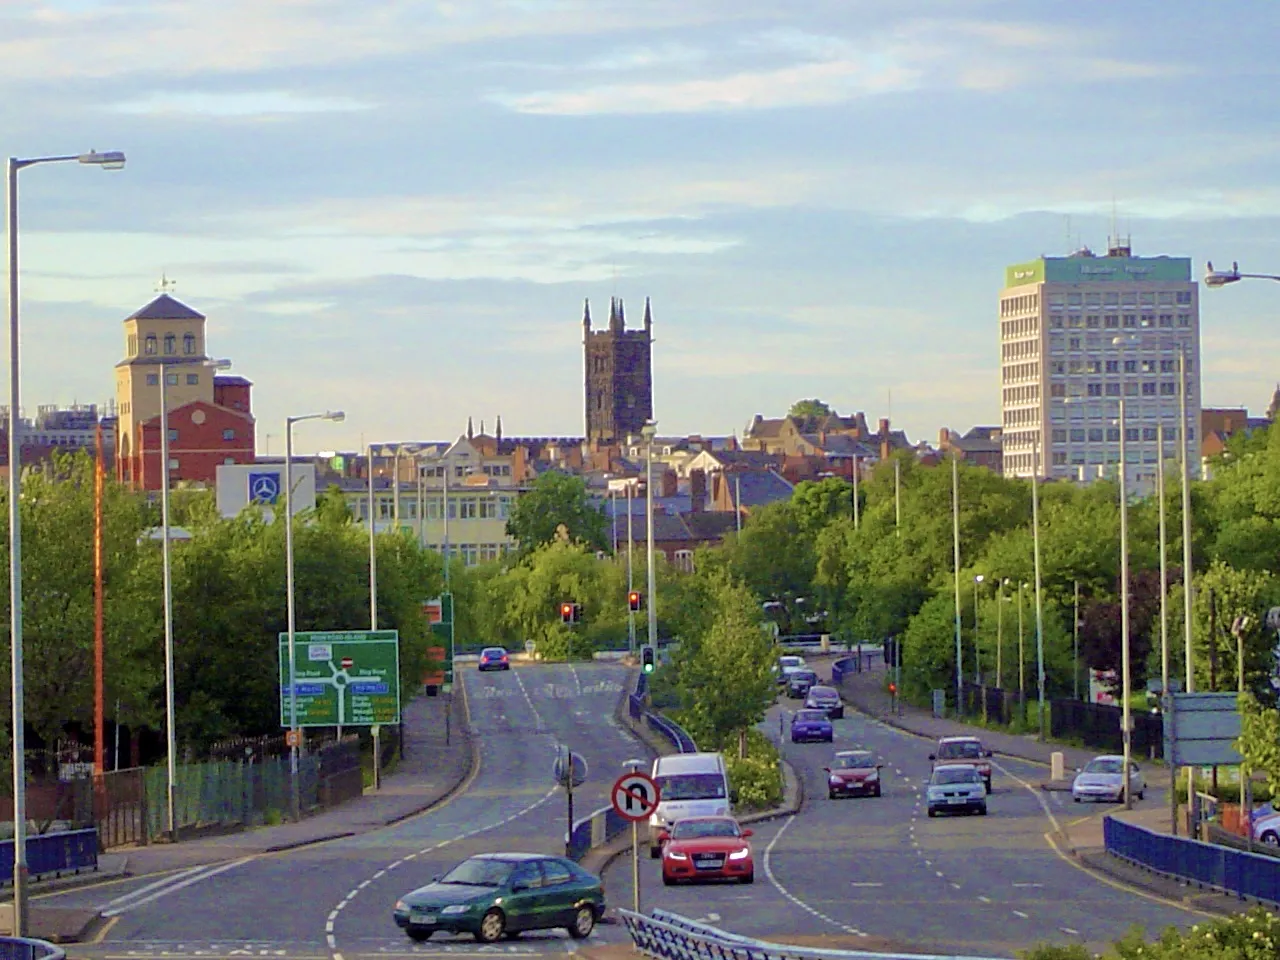 Photo showing: View of Wolverhampton showing the three main buildings on the city skyline